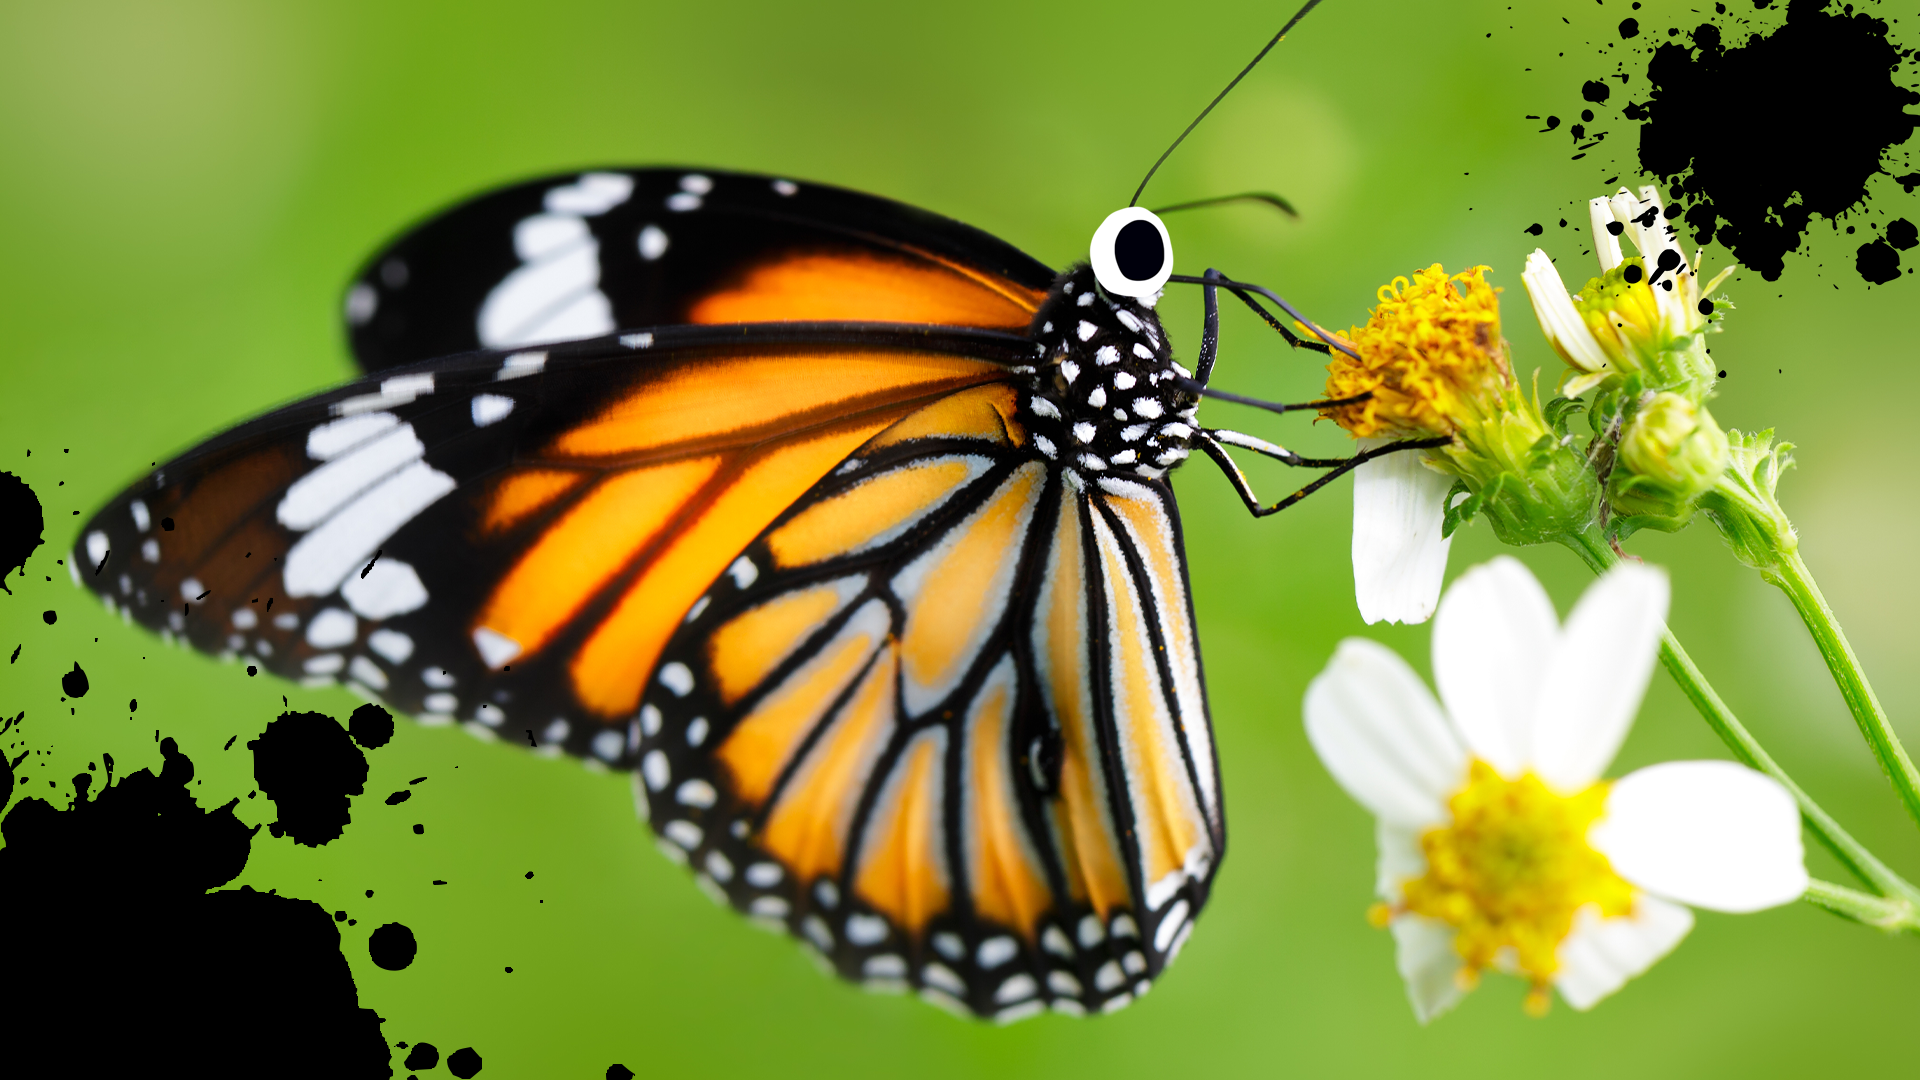 Butterfly on flower with splats